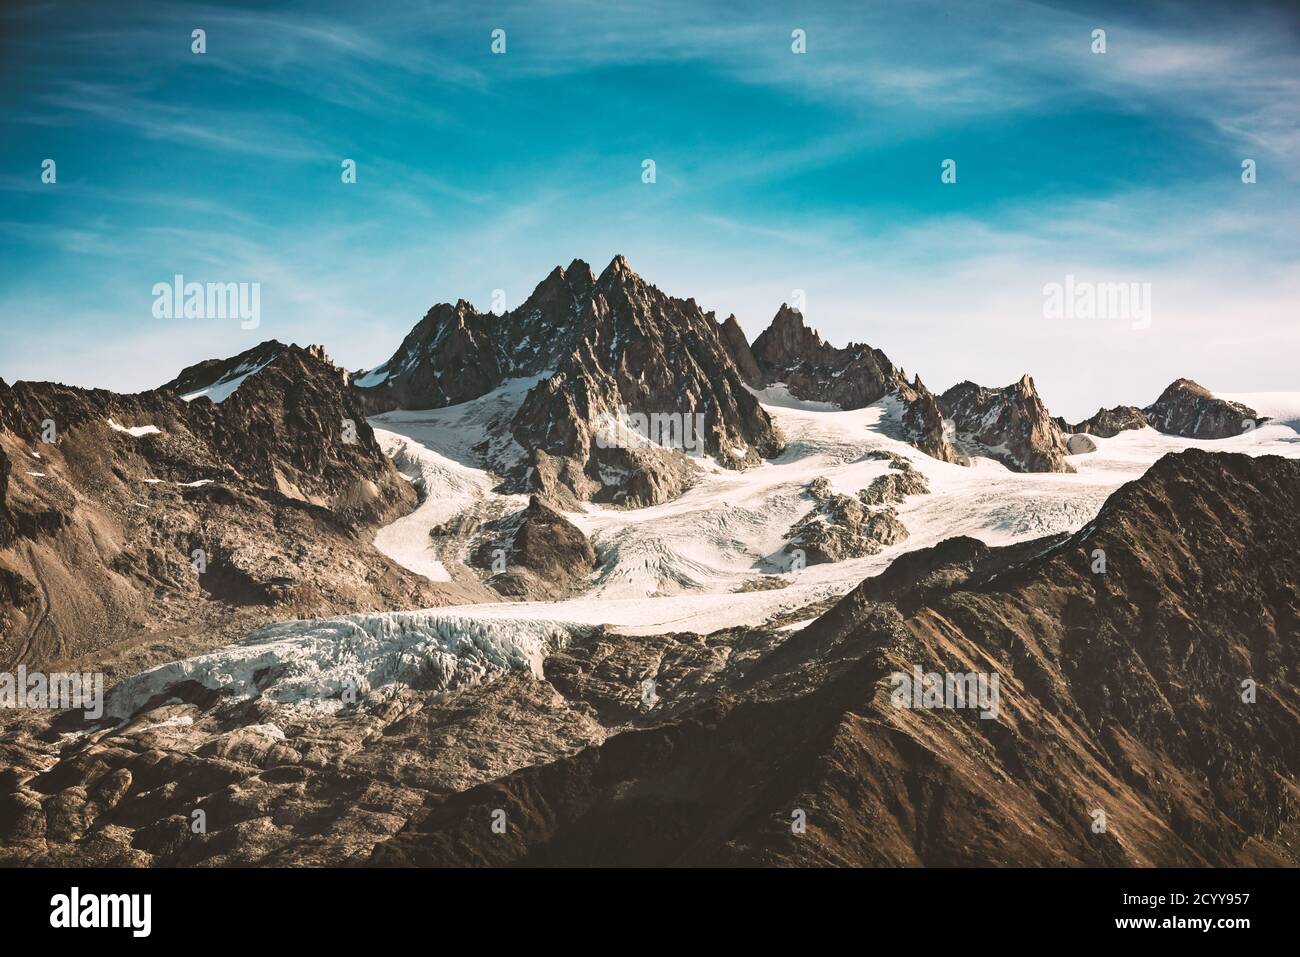 Incredible view of mountain peak in French Alps. Monte Bianco range, Mont Blank massif, France. Landscape photography Stock Photo